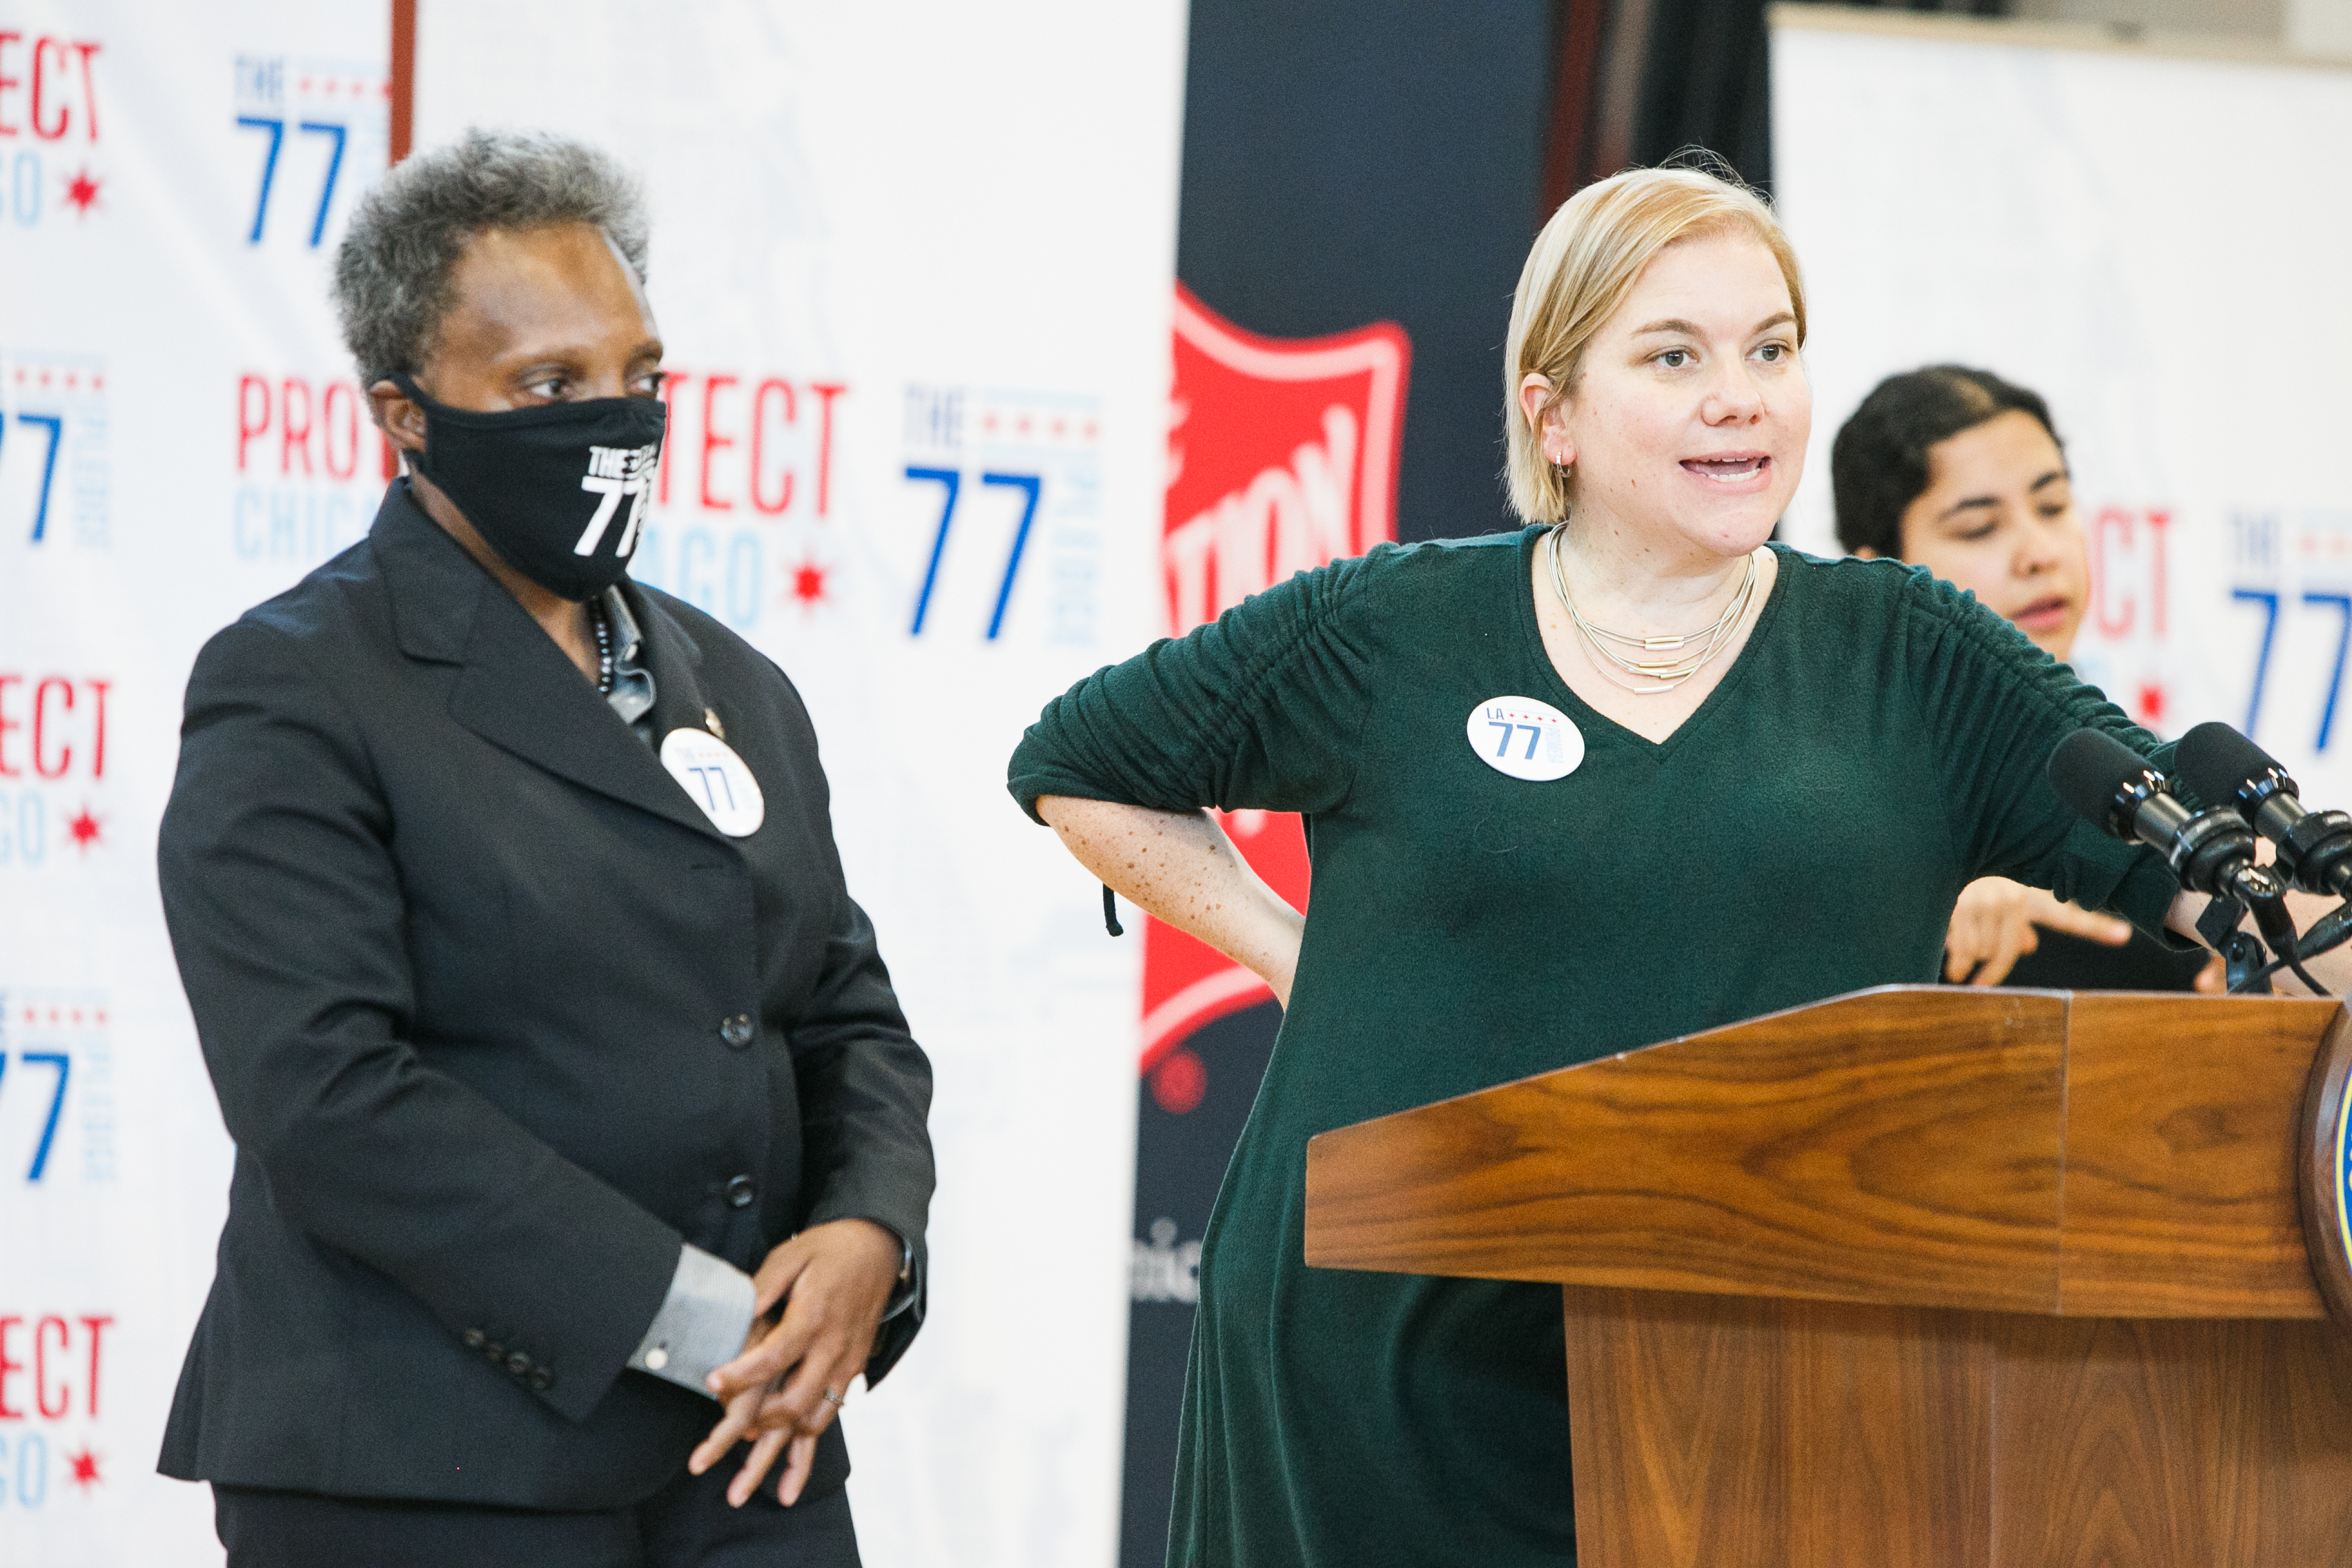 Mayor Lori Lightfoot and Dr. Allison Arwady answer questions at the Salvation Army’s Red Shield Center in the Englewood neighborhood Thursday morning, Sept. 23, 2021. Mark Capapas/Sun-Times